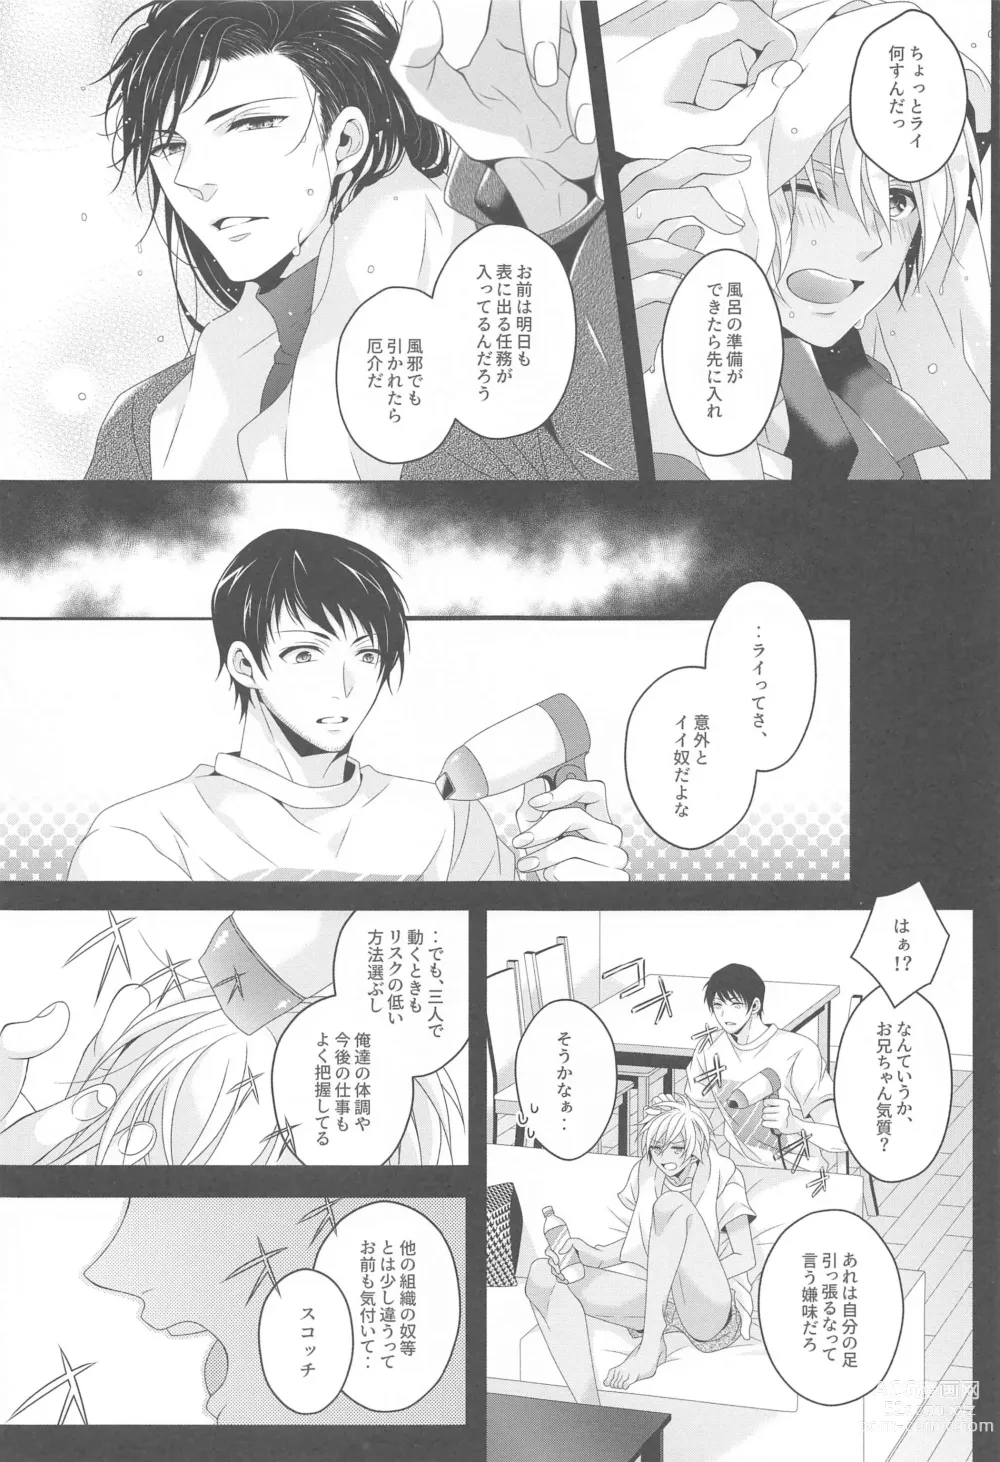 Page 8 of doujinshi Aibetsuriku no Yosame - A rainy night the pain of separation from loved ones